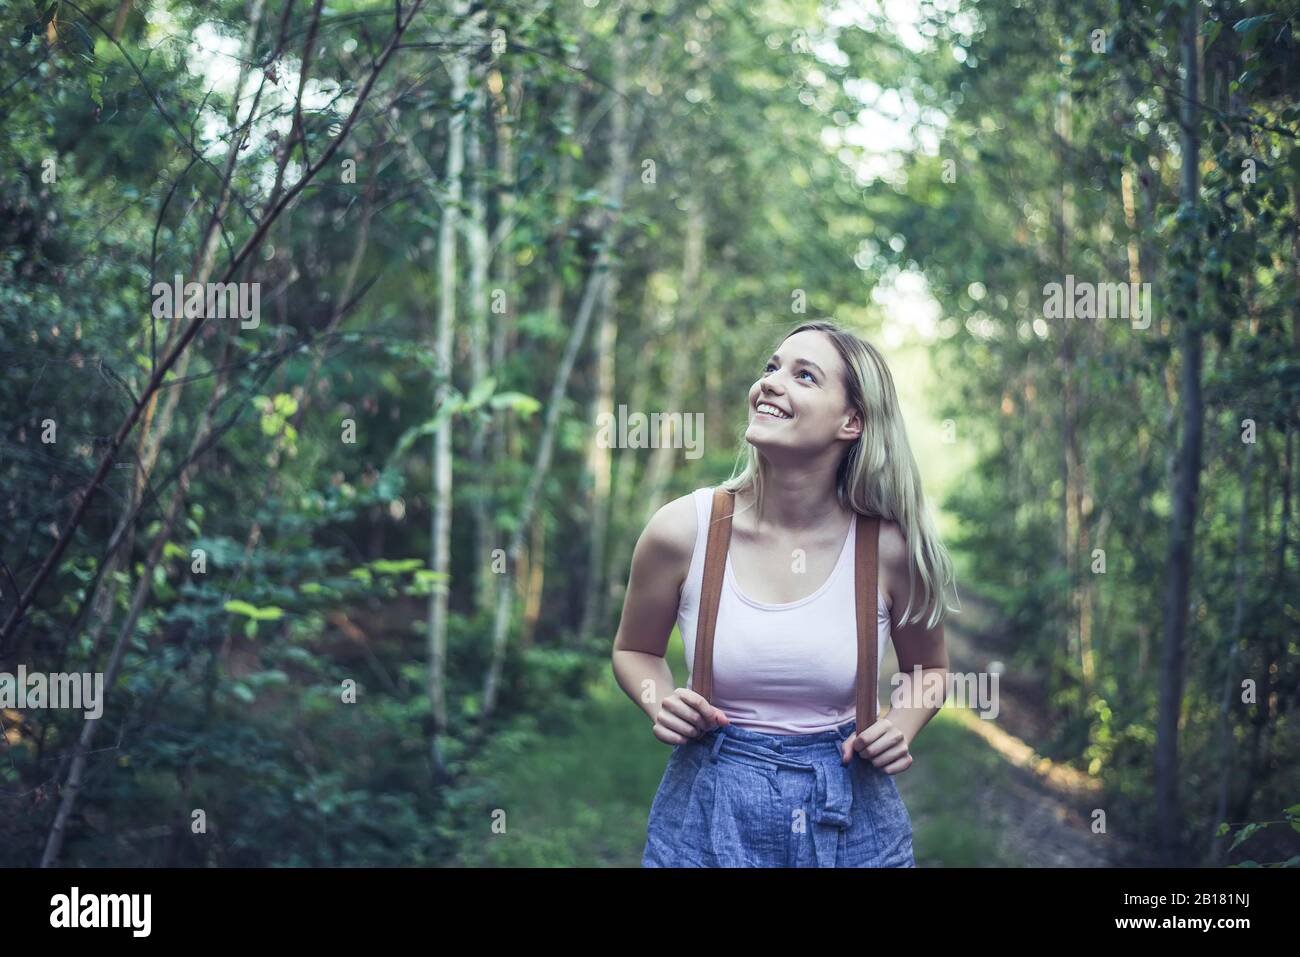 Portrait of smiling young woman with backpack in forest watching something Stock Photo